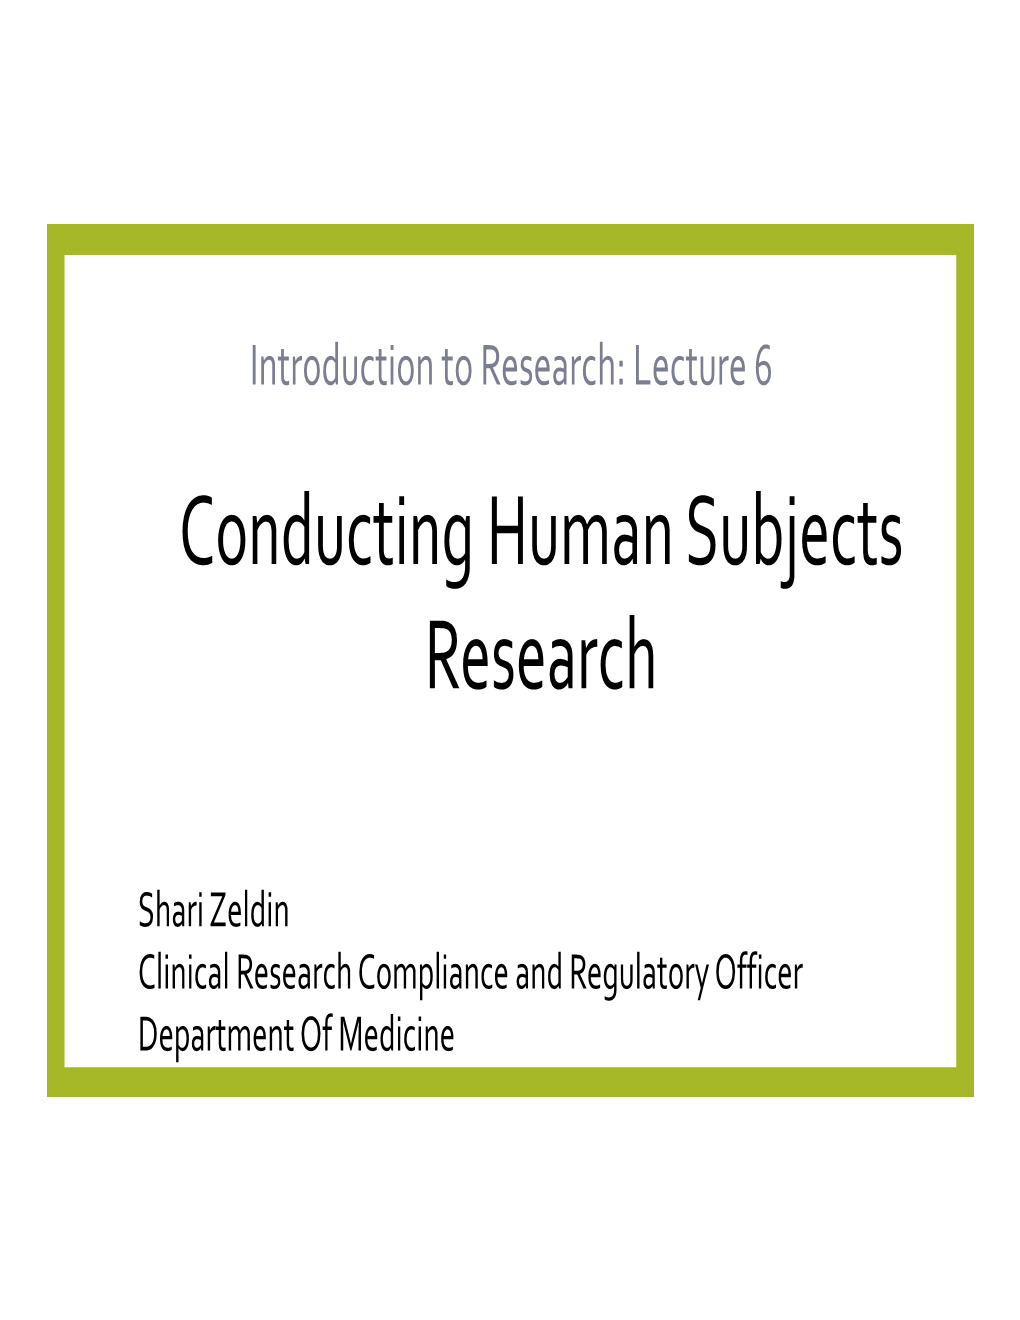 Conducting Human Subjects Research